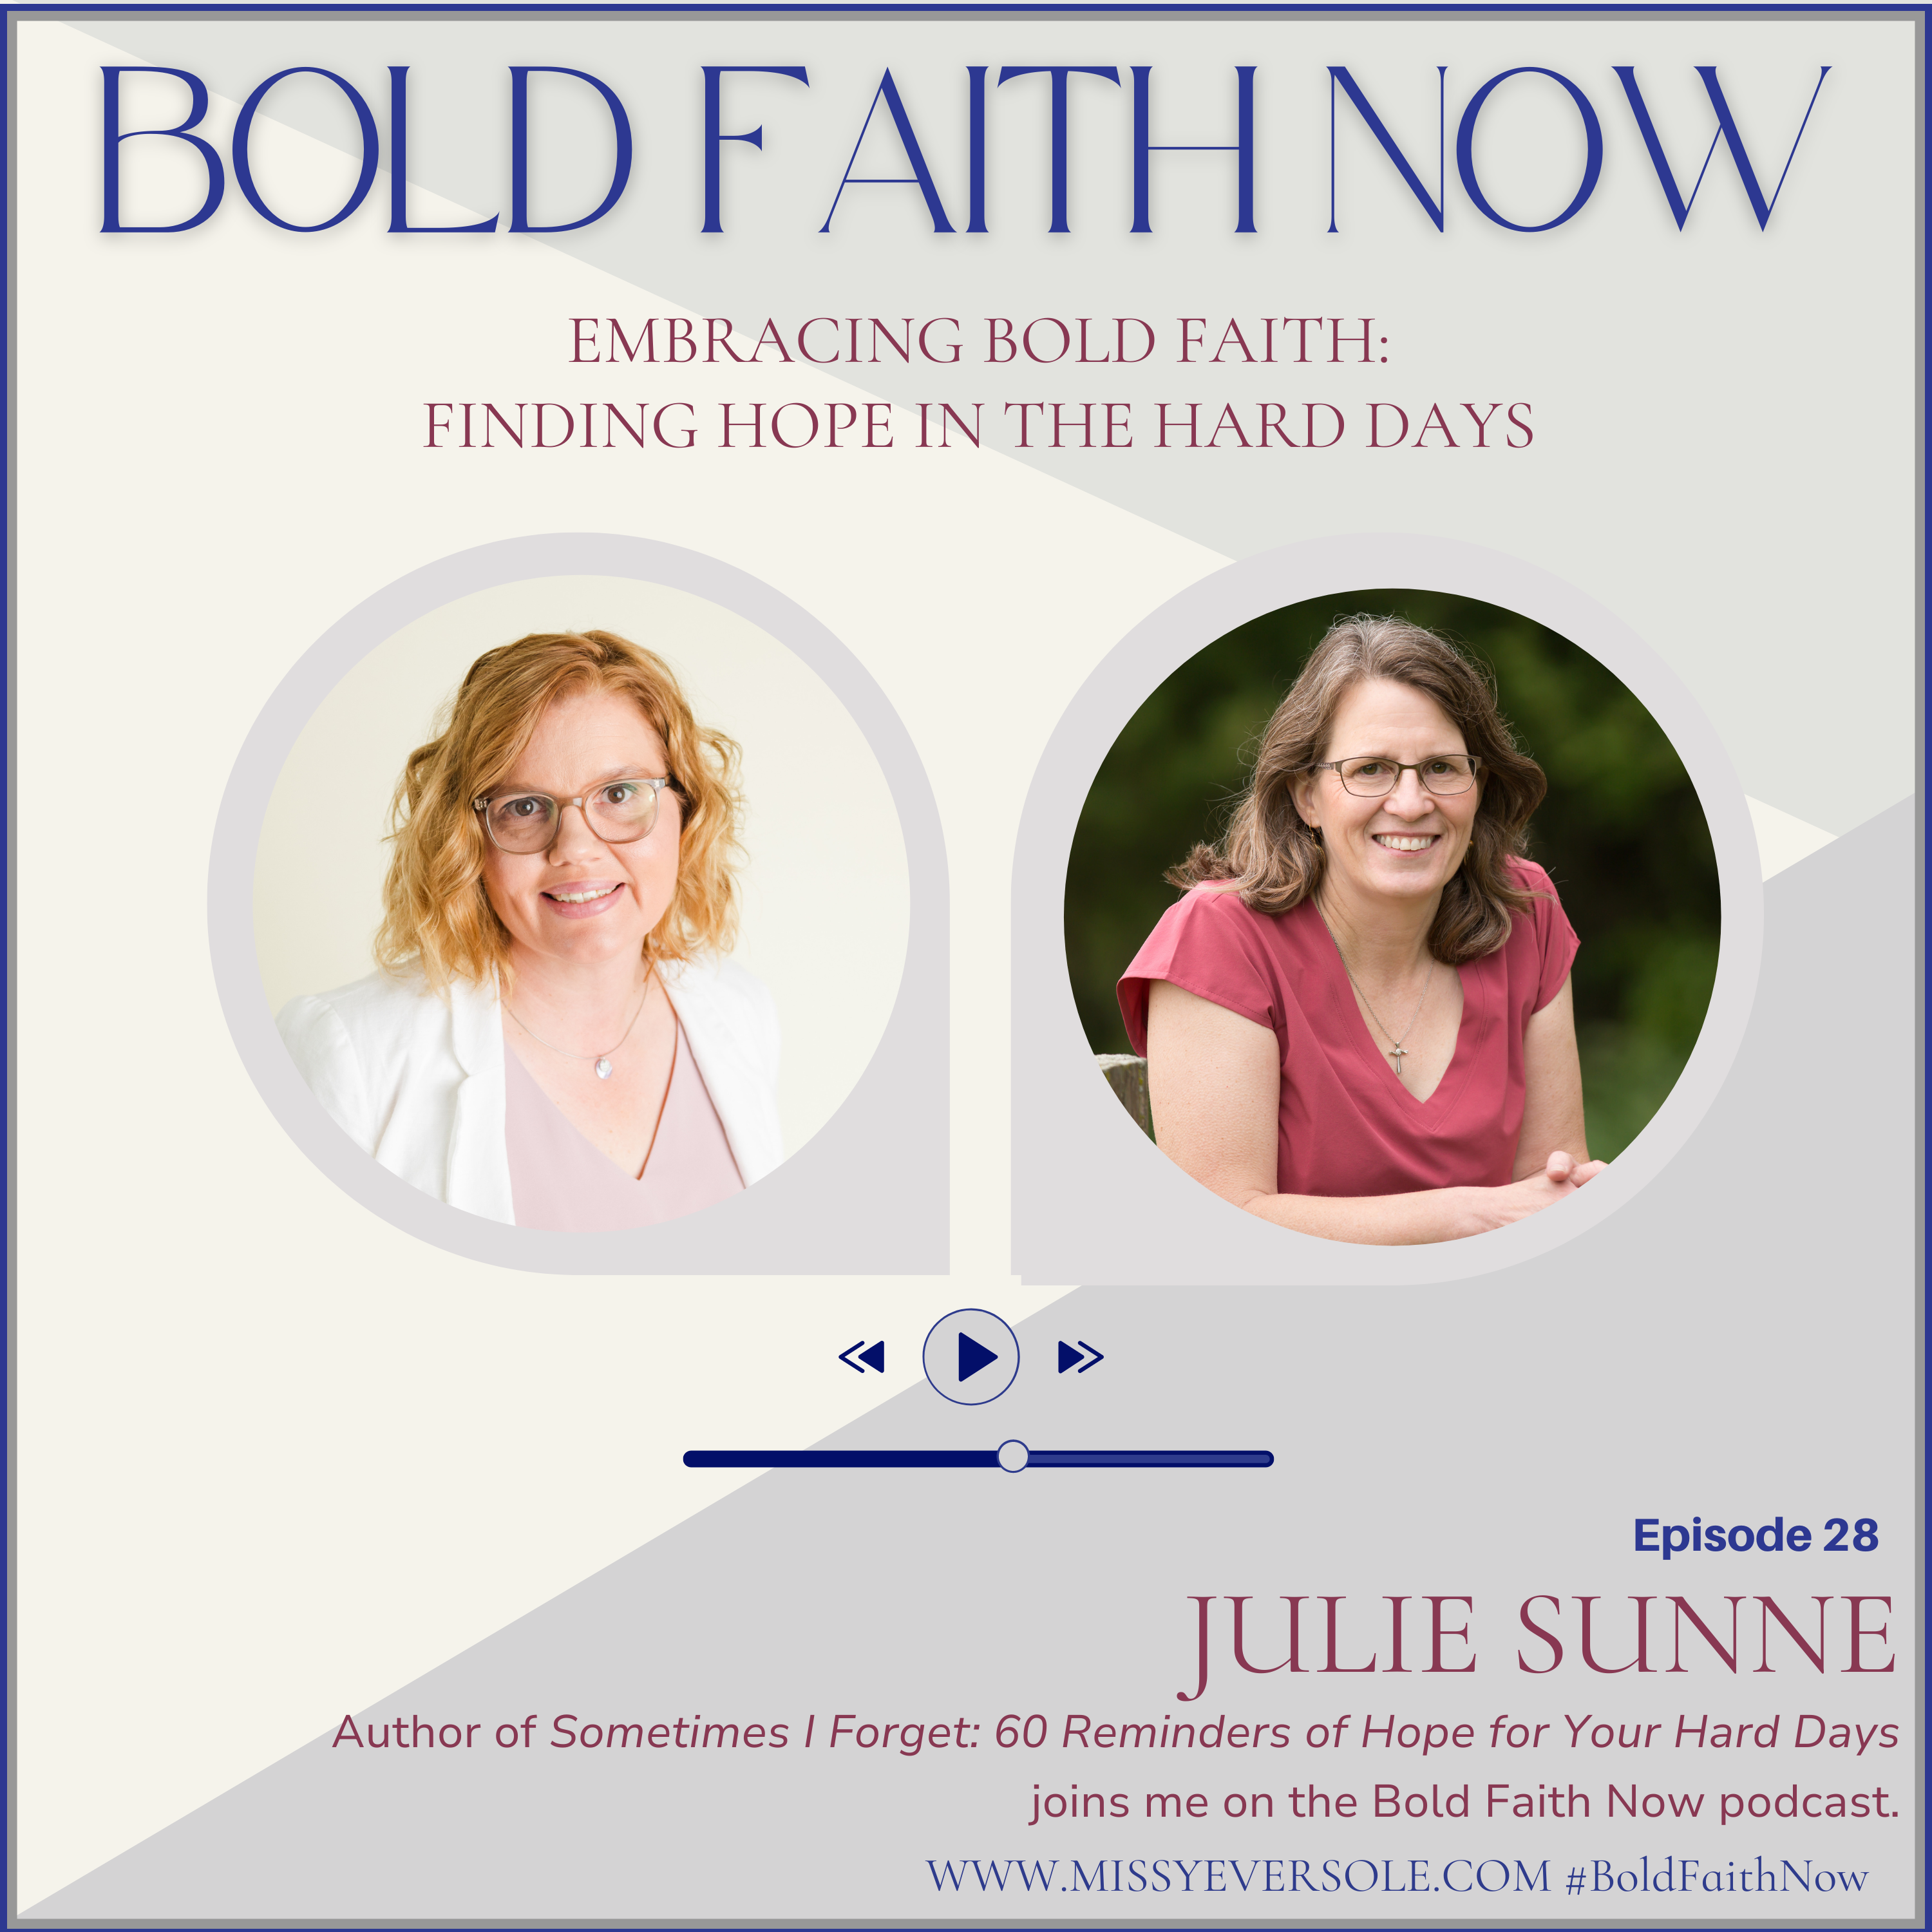 Embracing Bold Faith: Finding Hope in the Hard Days with Julie Sunne